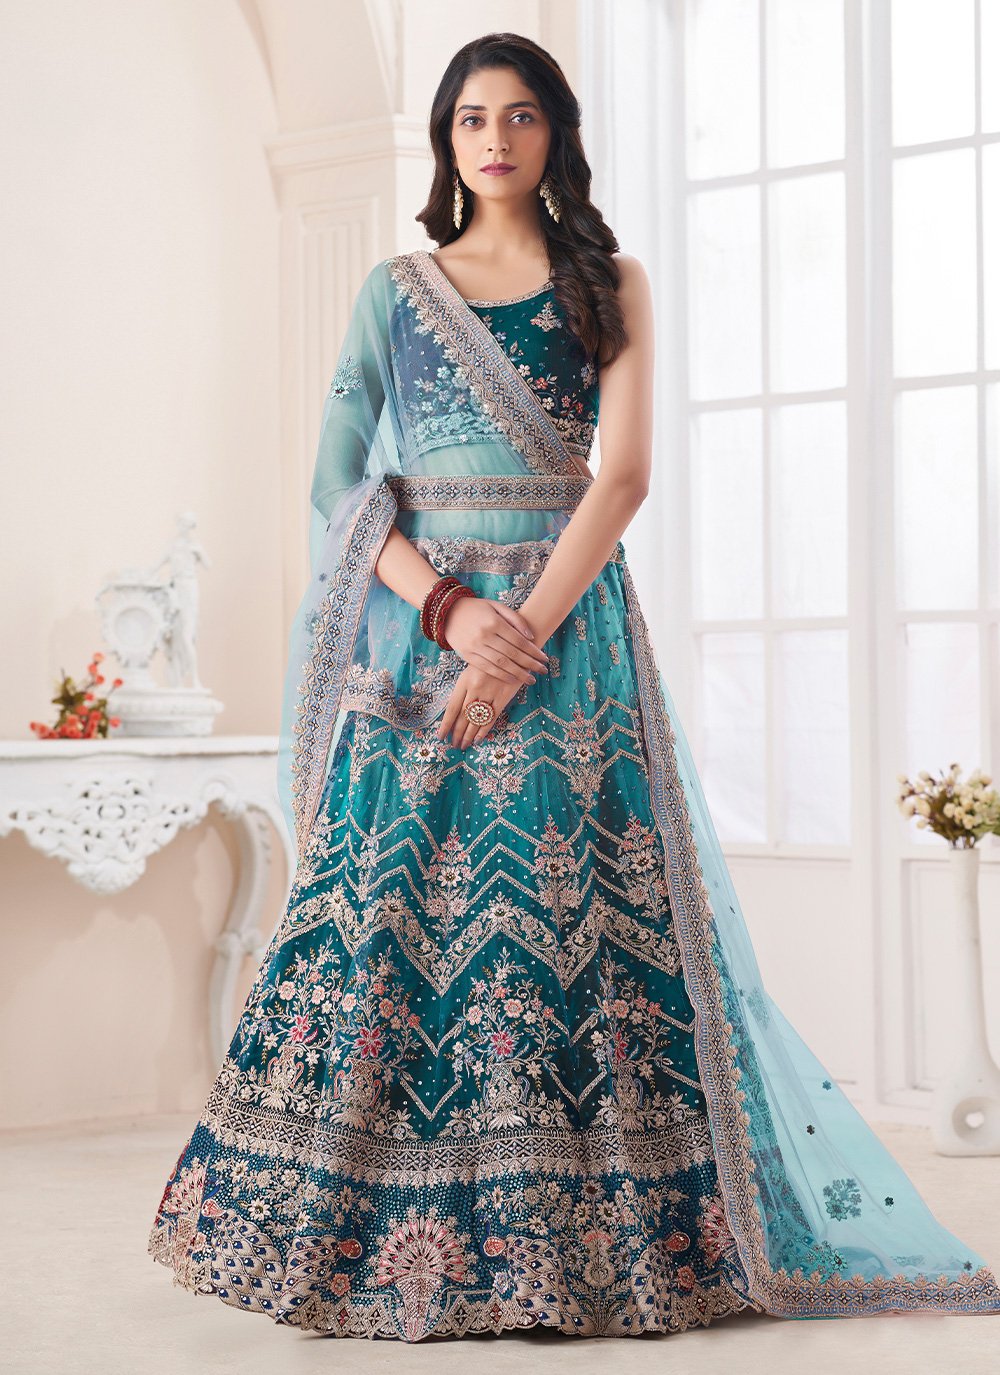 Shop Blue Mirror Printed Lehenga for Women Online from India's Luxury Designers  2023